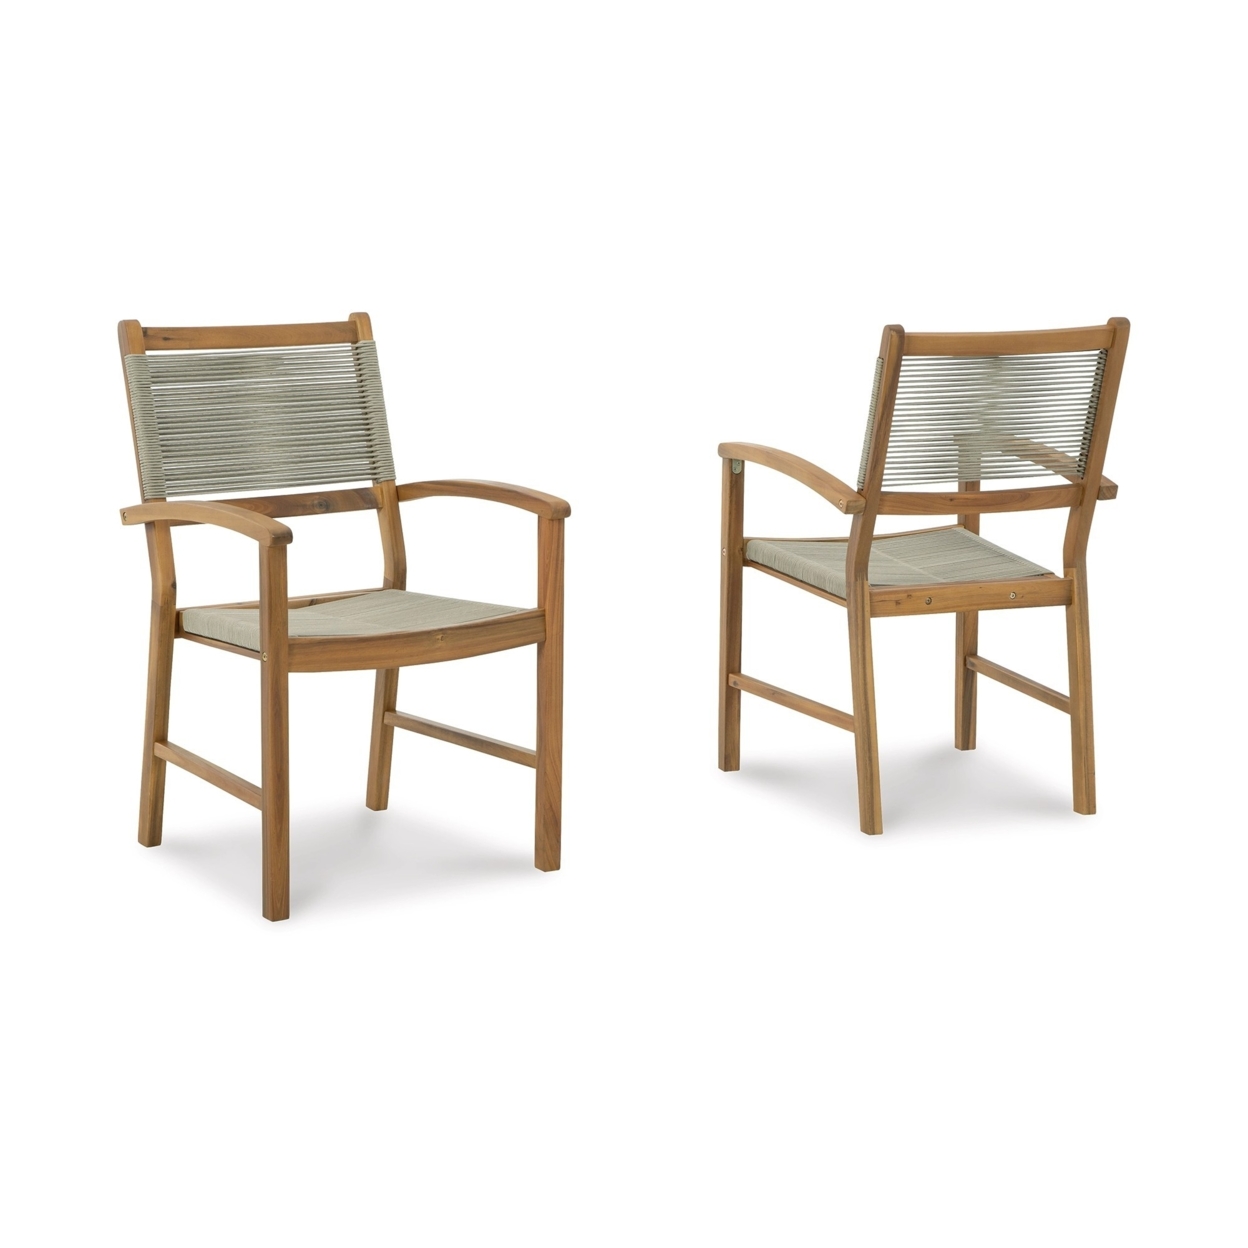 Ita 22 Inch Armchair, Set Of 2, Rope Seat And Backrest, Brown Acacia Frame- Saltoro Sherpi